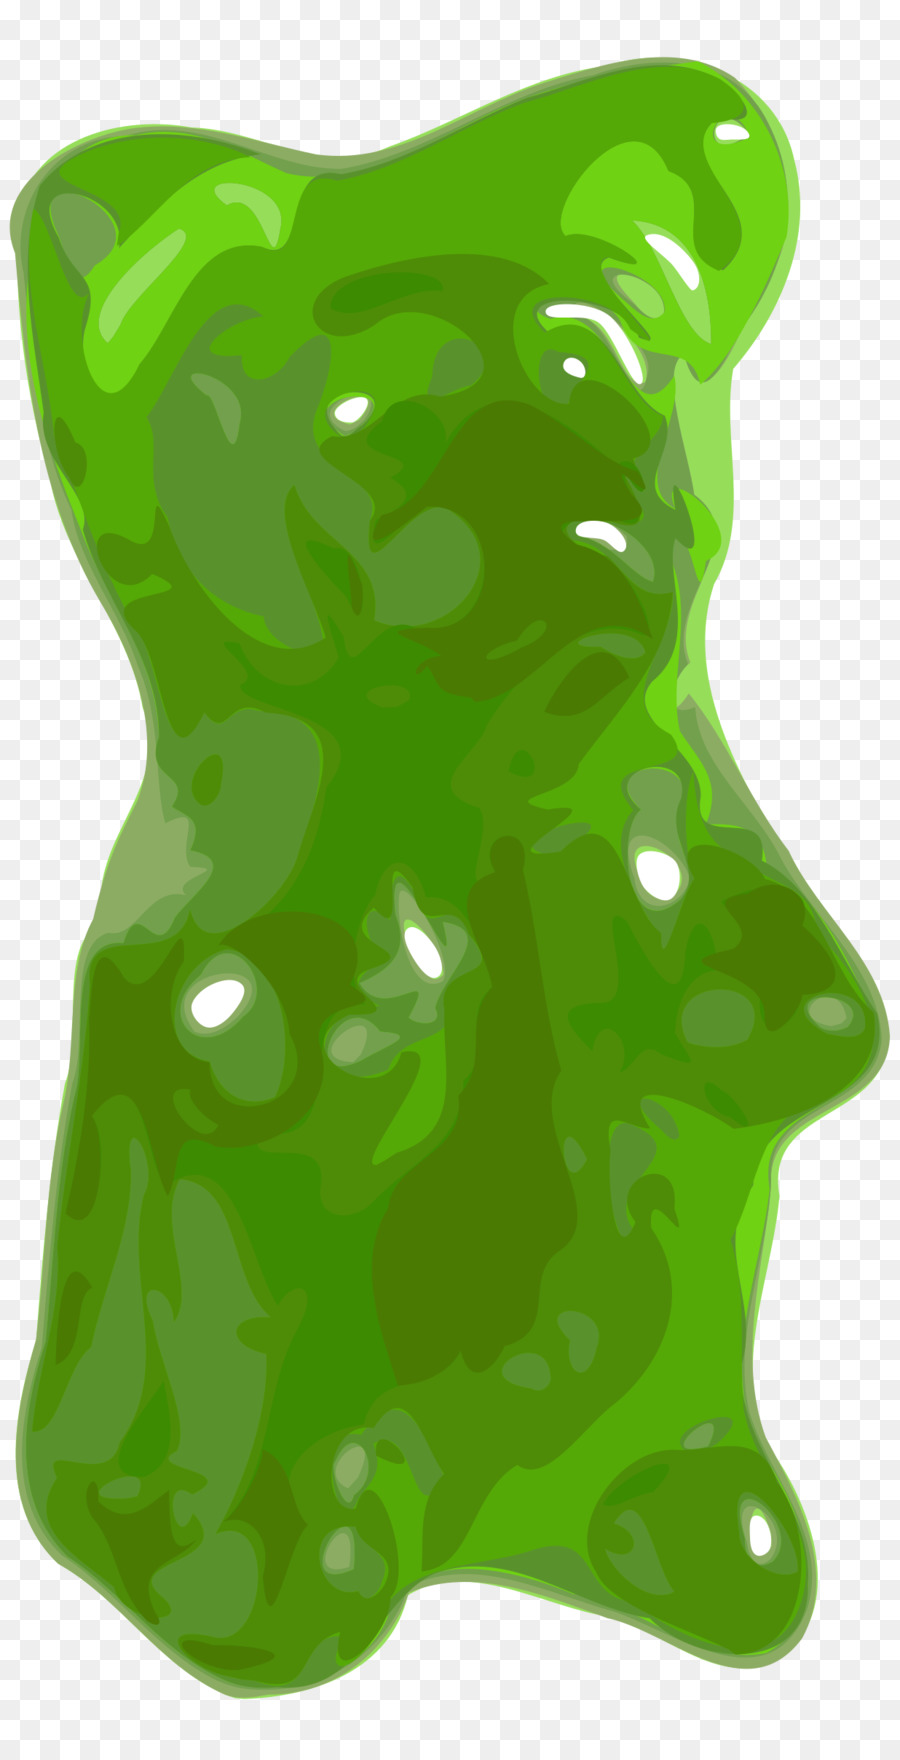 Chewing gum Gummy bear Gummi candy Gelatin dessert - Gummy Candy Cliparts png download - 1236*2400 - Free Transparent Chewing Gum png Download.